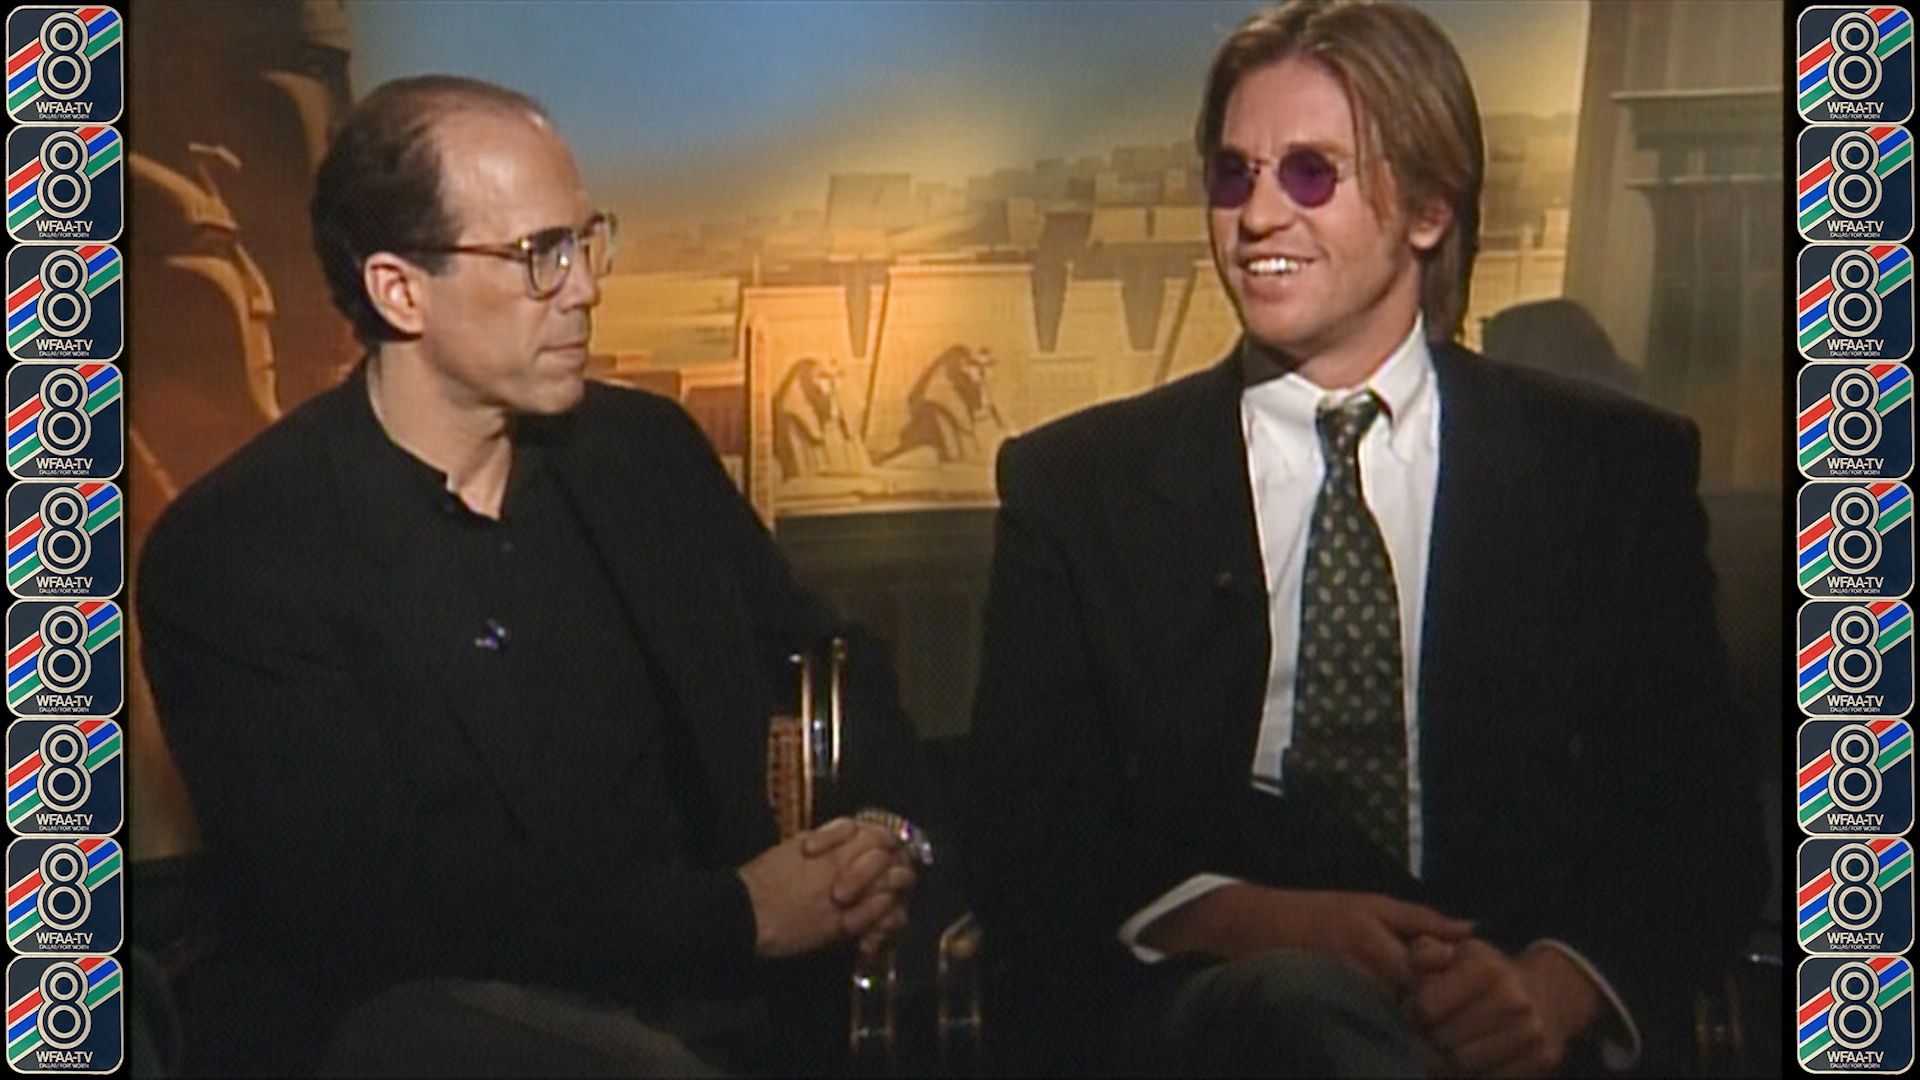 Val Kilmer and Jeffrey Katzenberg sat down with WFAA to talk about the 1998 film The Prince of Egypt.